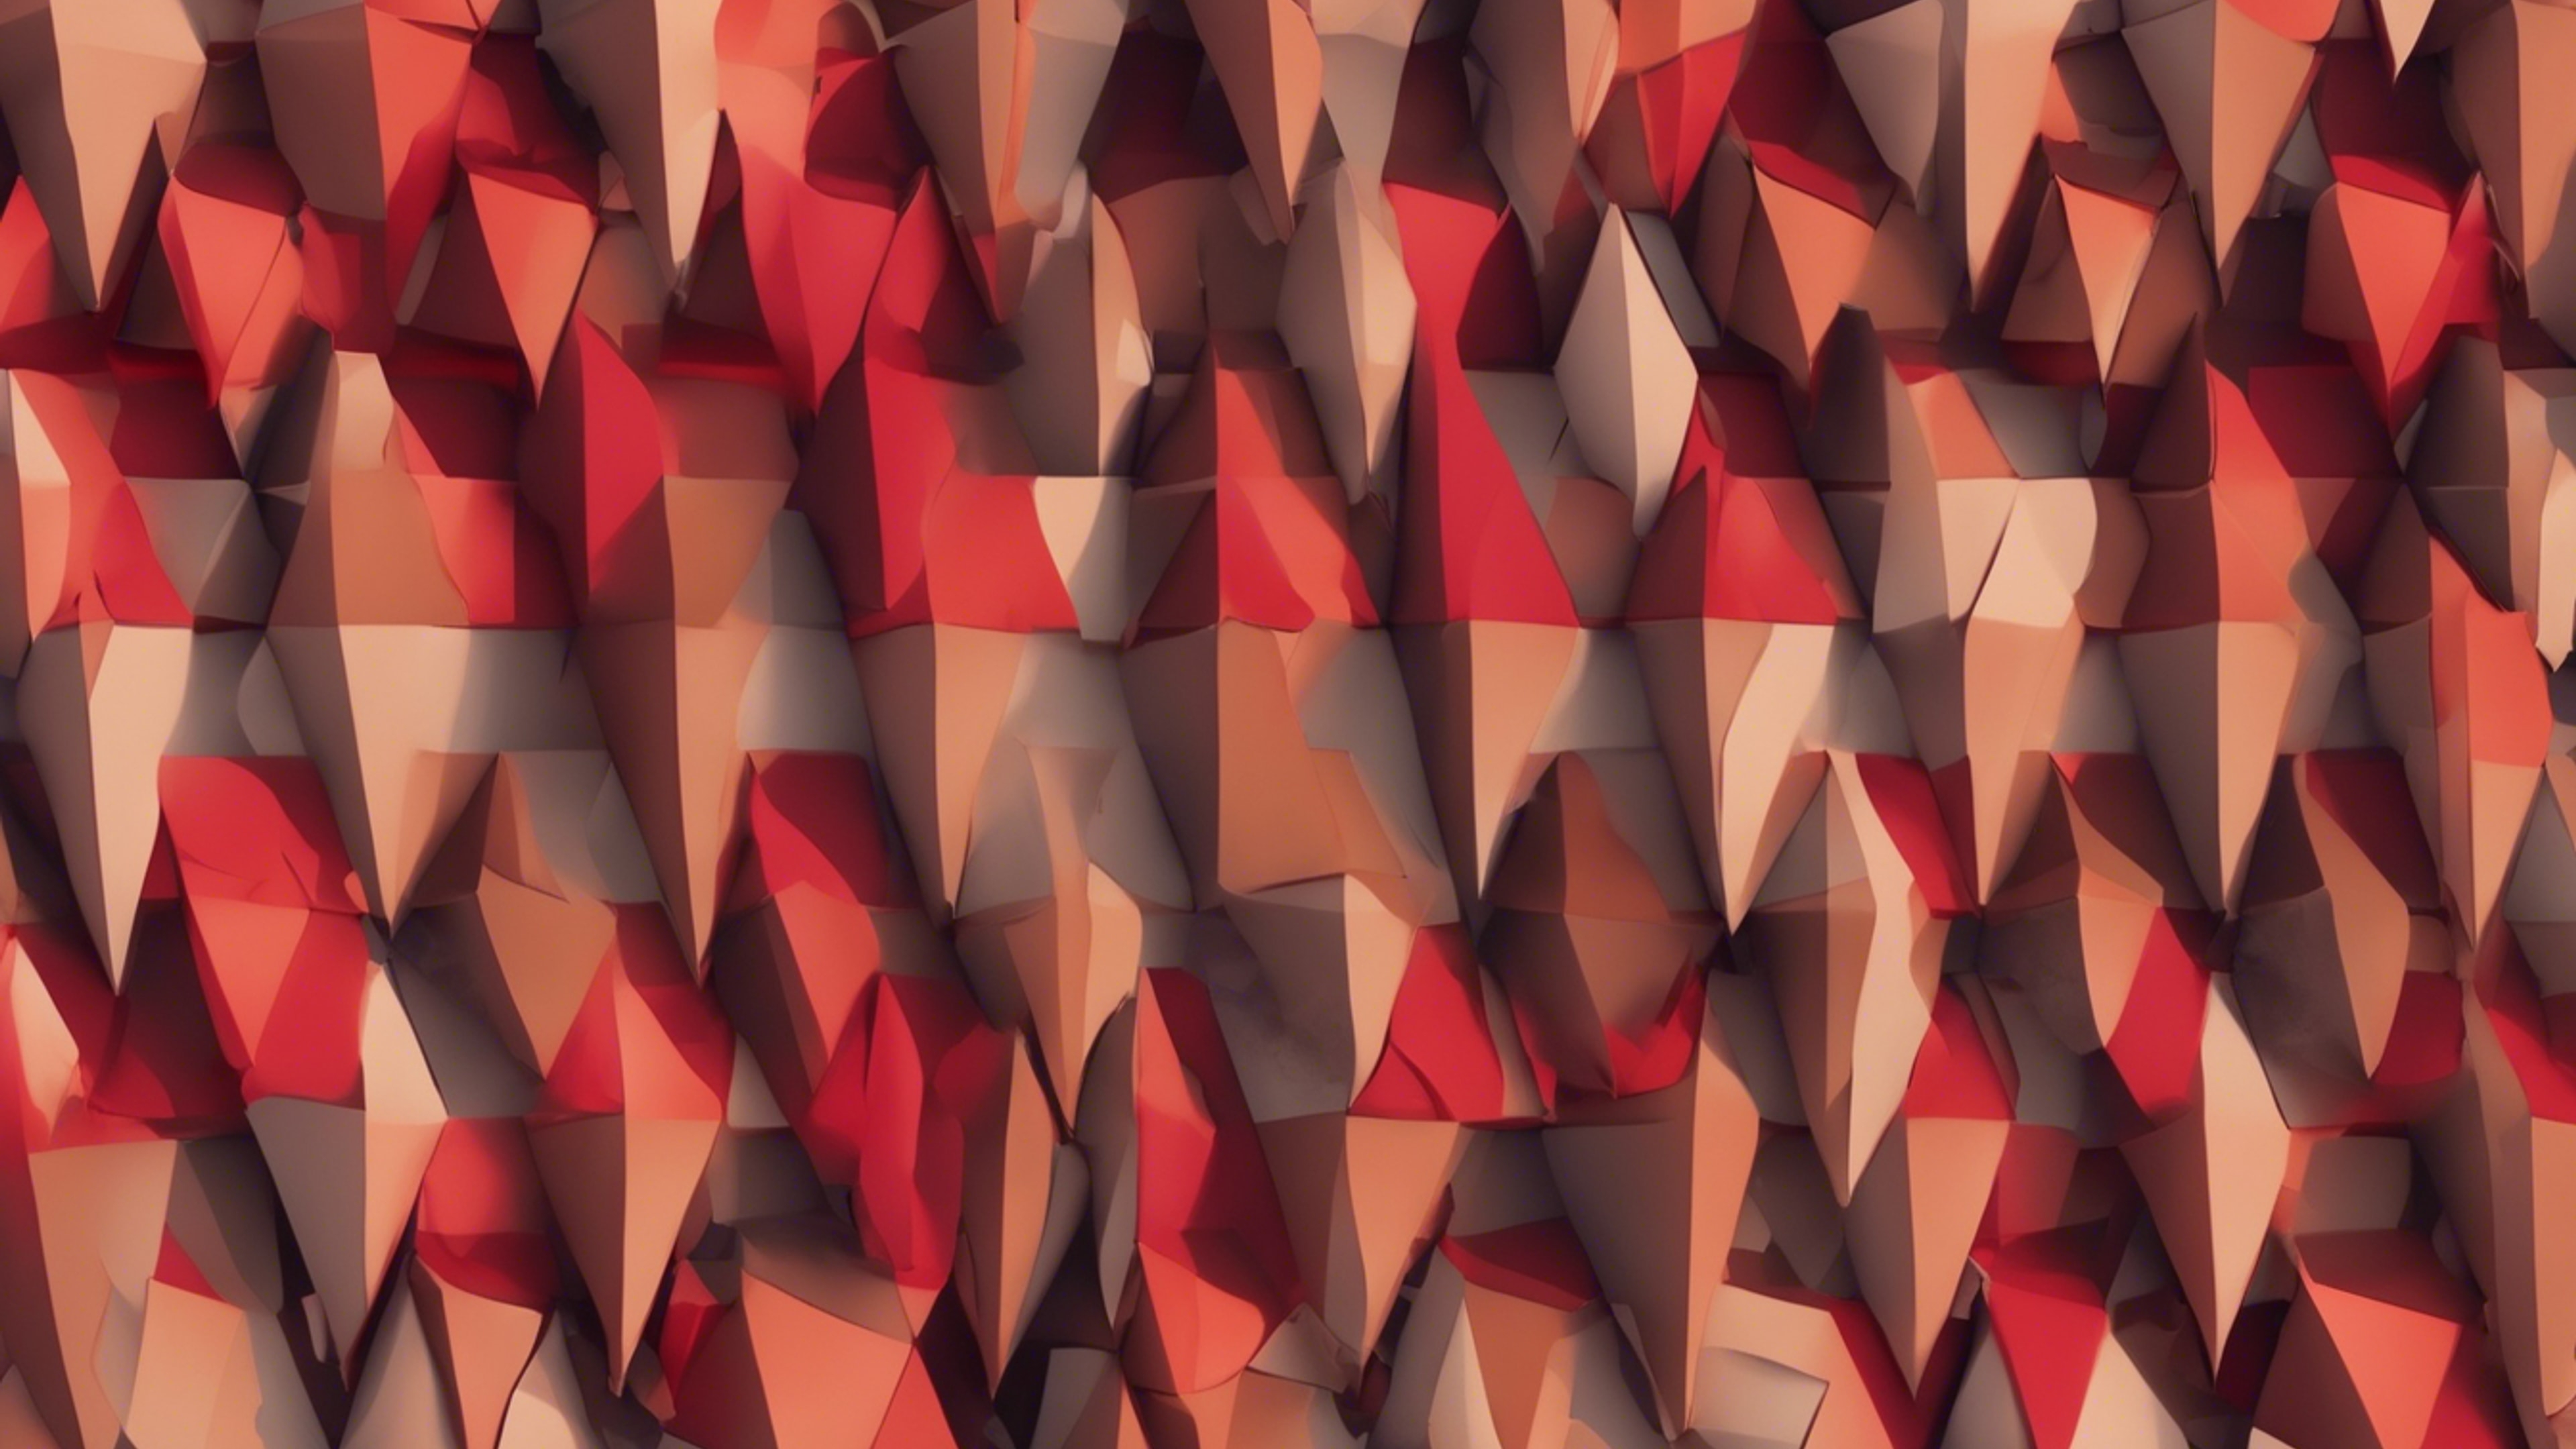 A geometrical abstract pattern consisting of trapeziums in shades of vibrant red and muted brown. ផ្ទាំង​រូបភាព[25af3713355d4095863a]